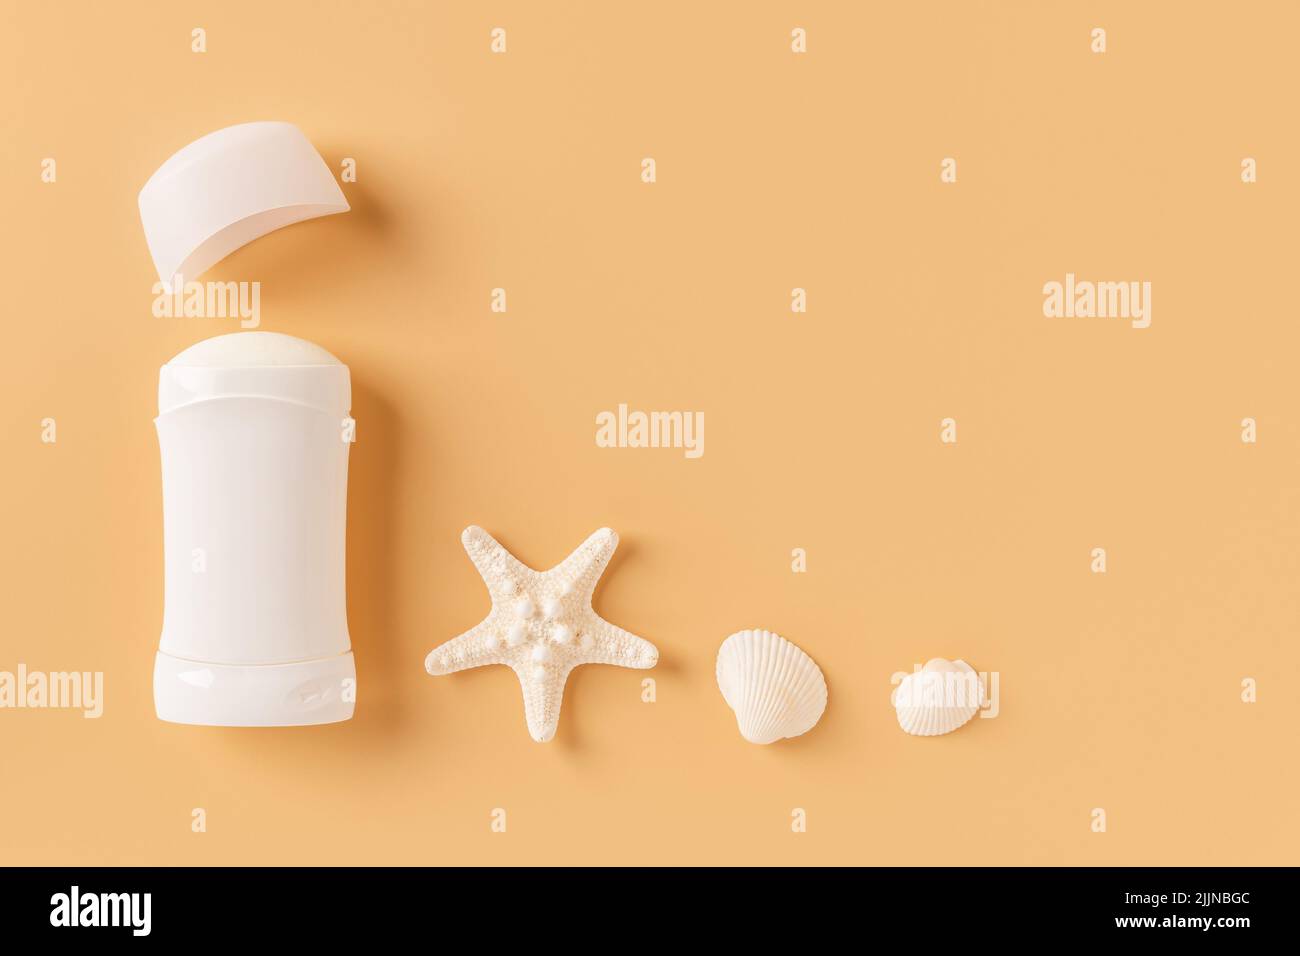 Open solid deodorant antiperspirant, sea star and shells on a pastel orange background. Natural sea mineral toiletries and organic cosmetics concept. Stock Photo